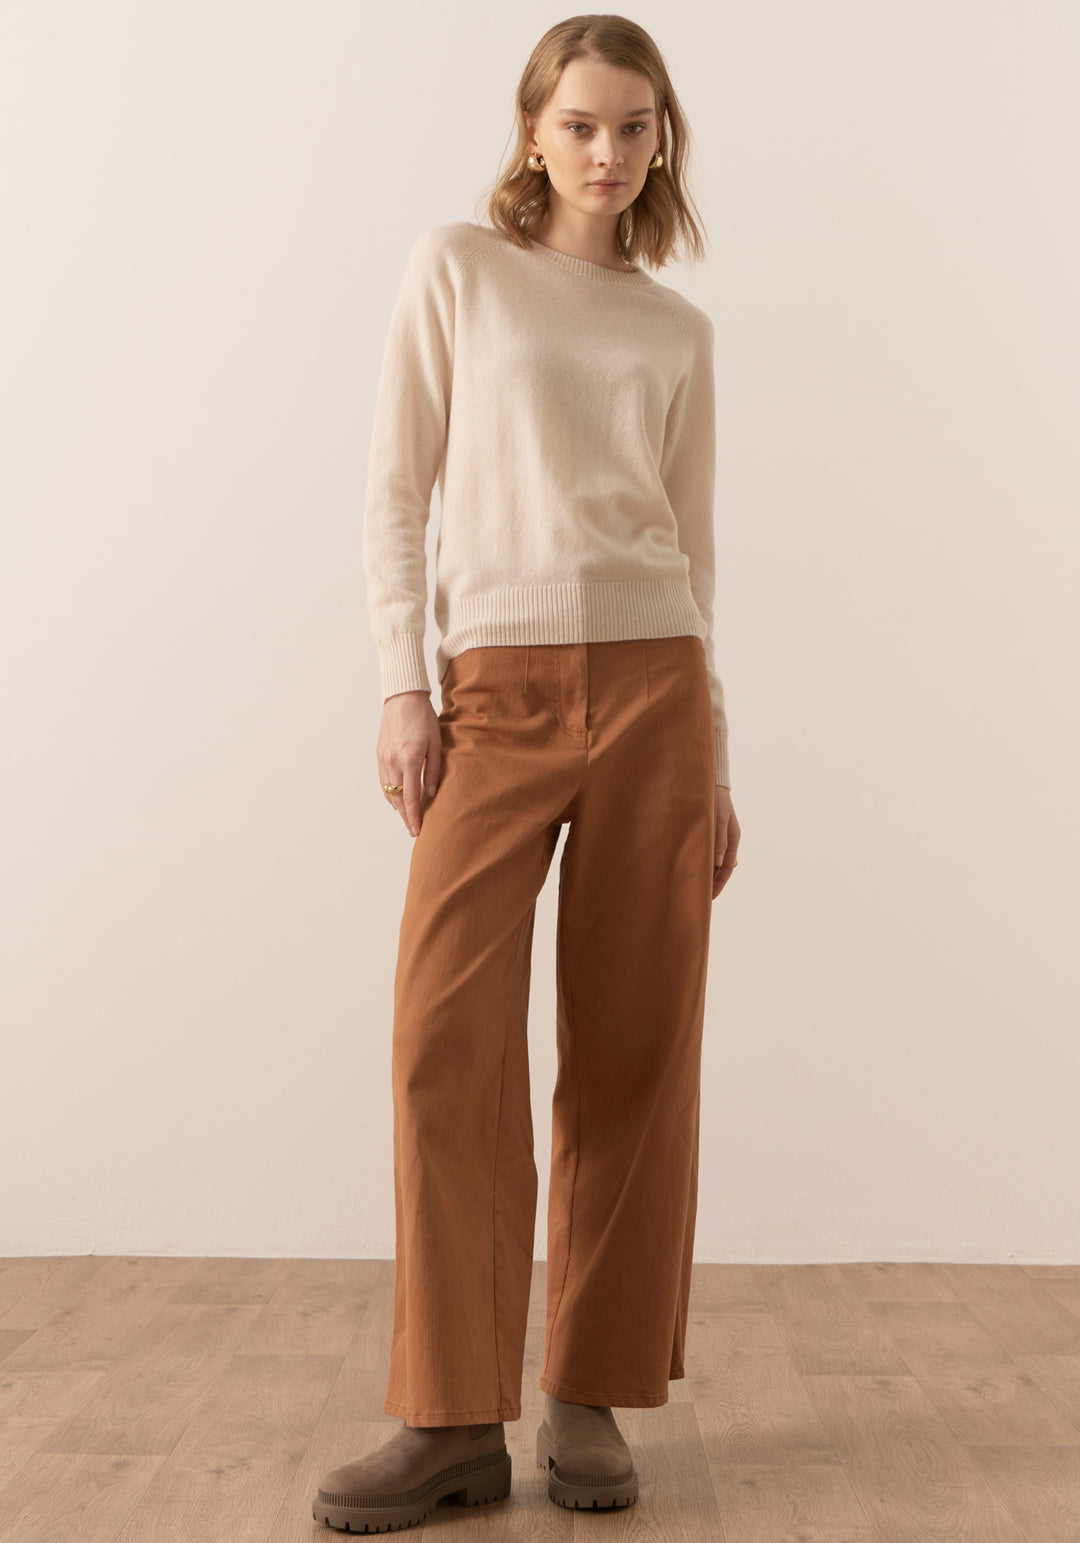 POL Clothing | Willow Cashmere Crew Neck Knit | Shell